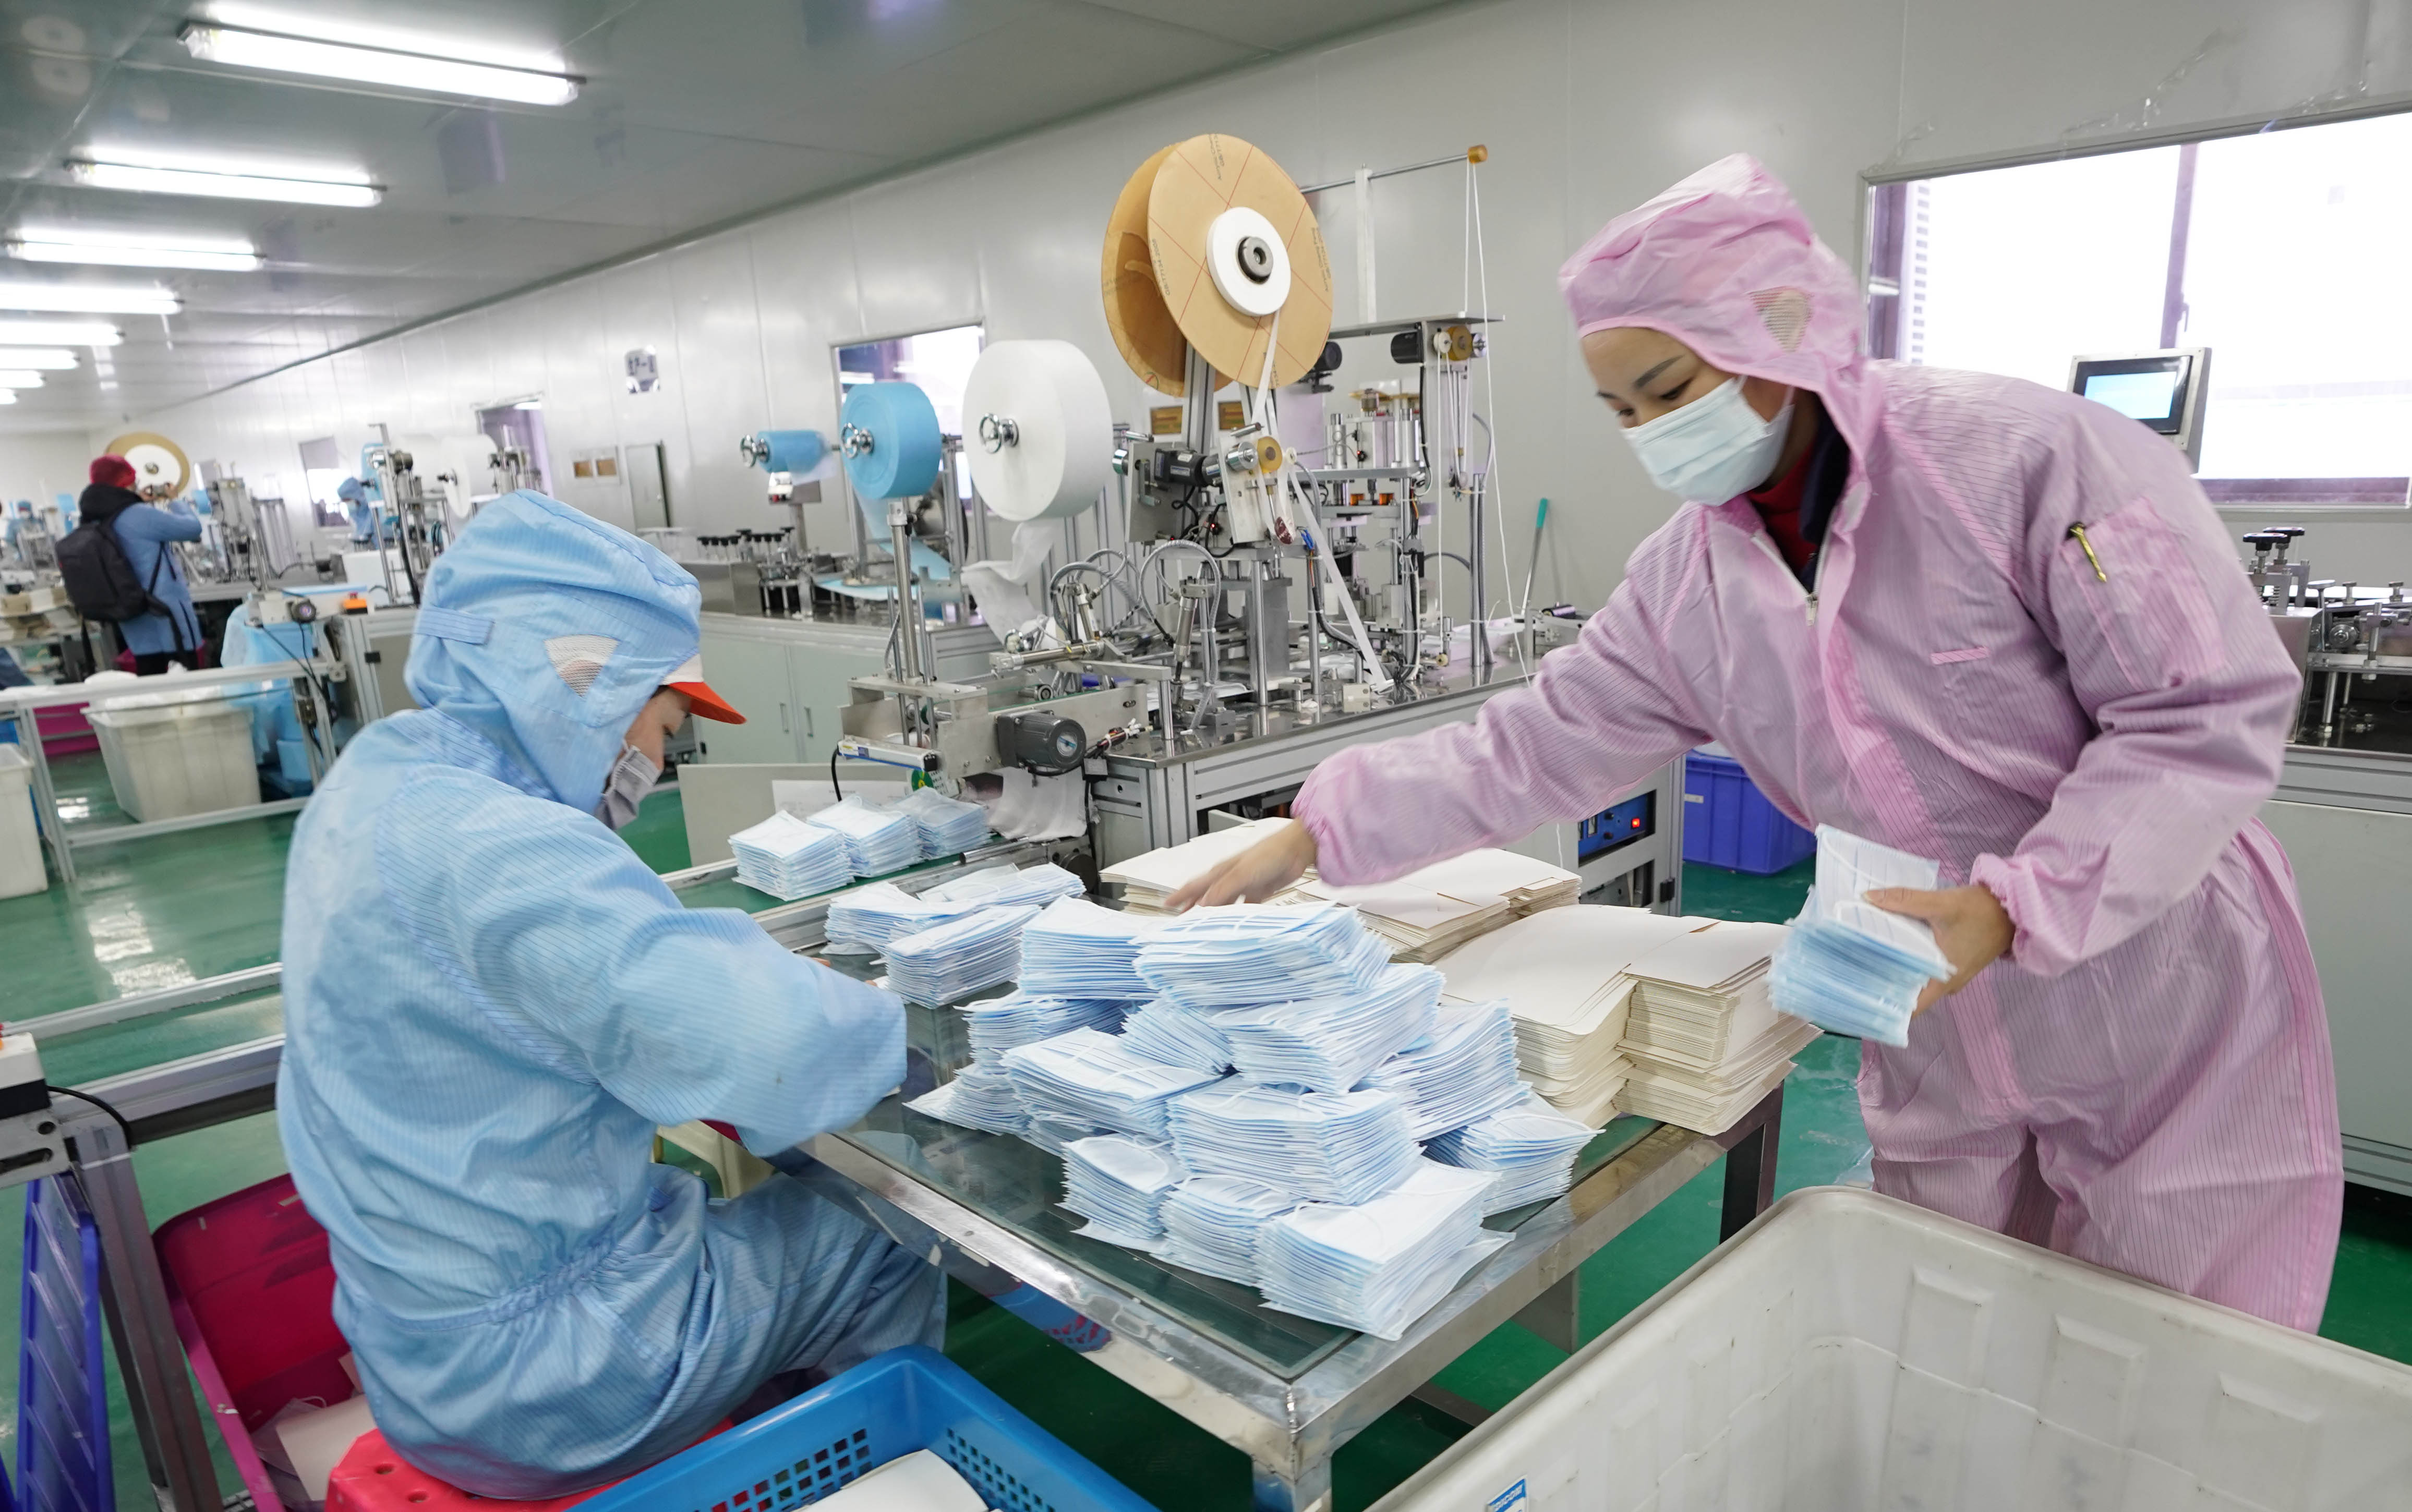 Workers make facial masks at the workshop of a company in Wuhan, central China